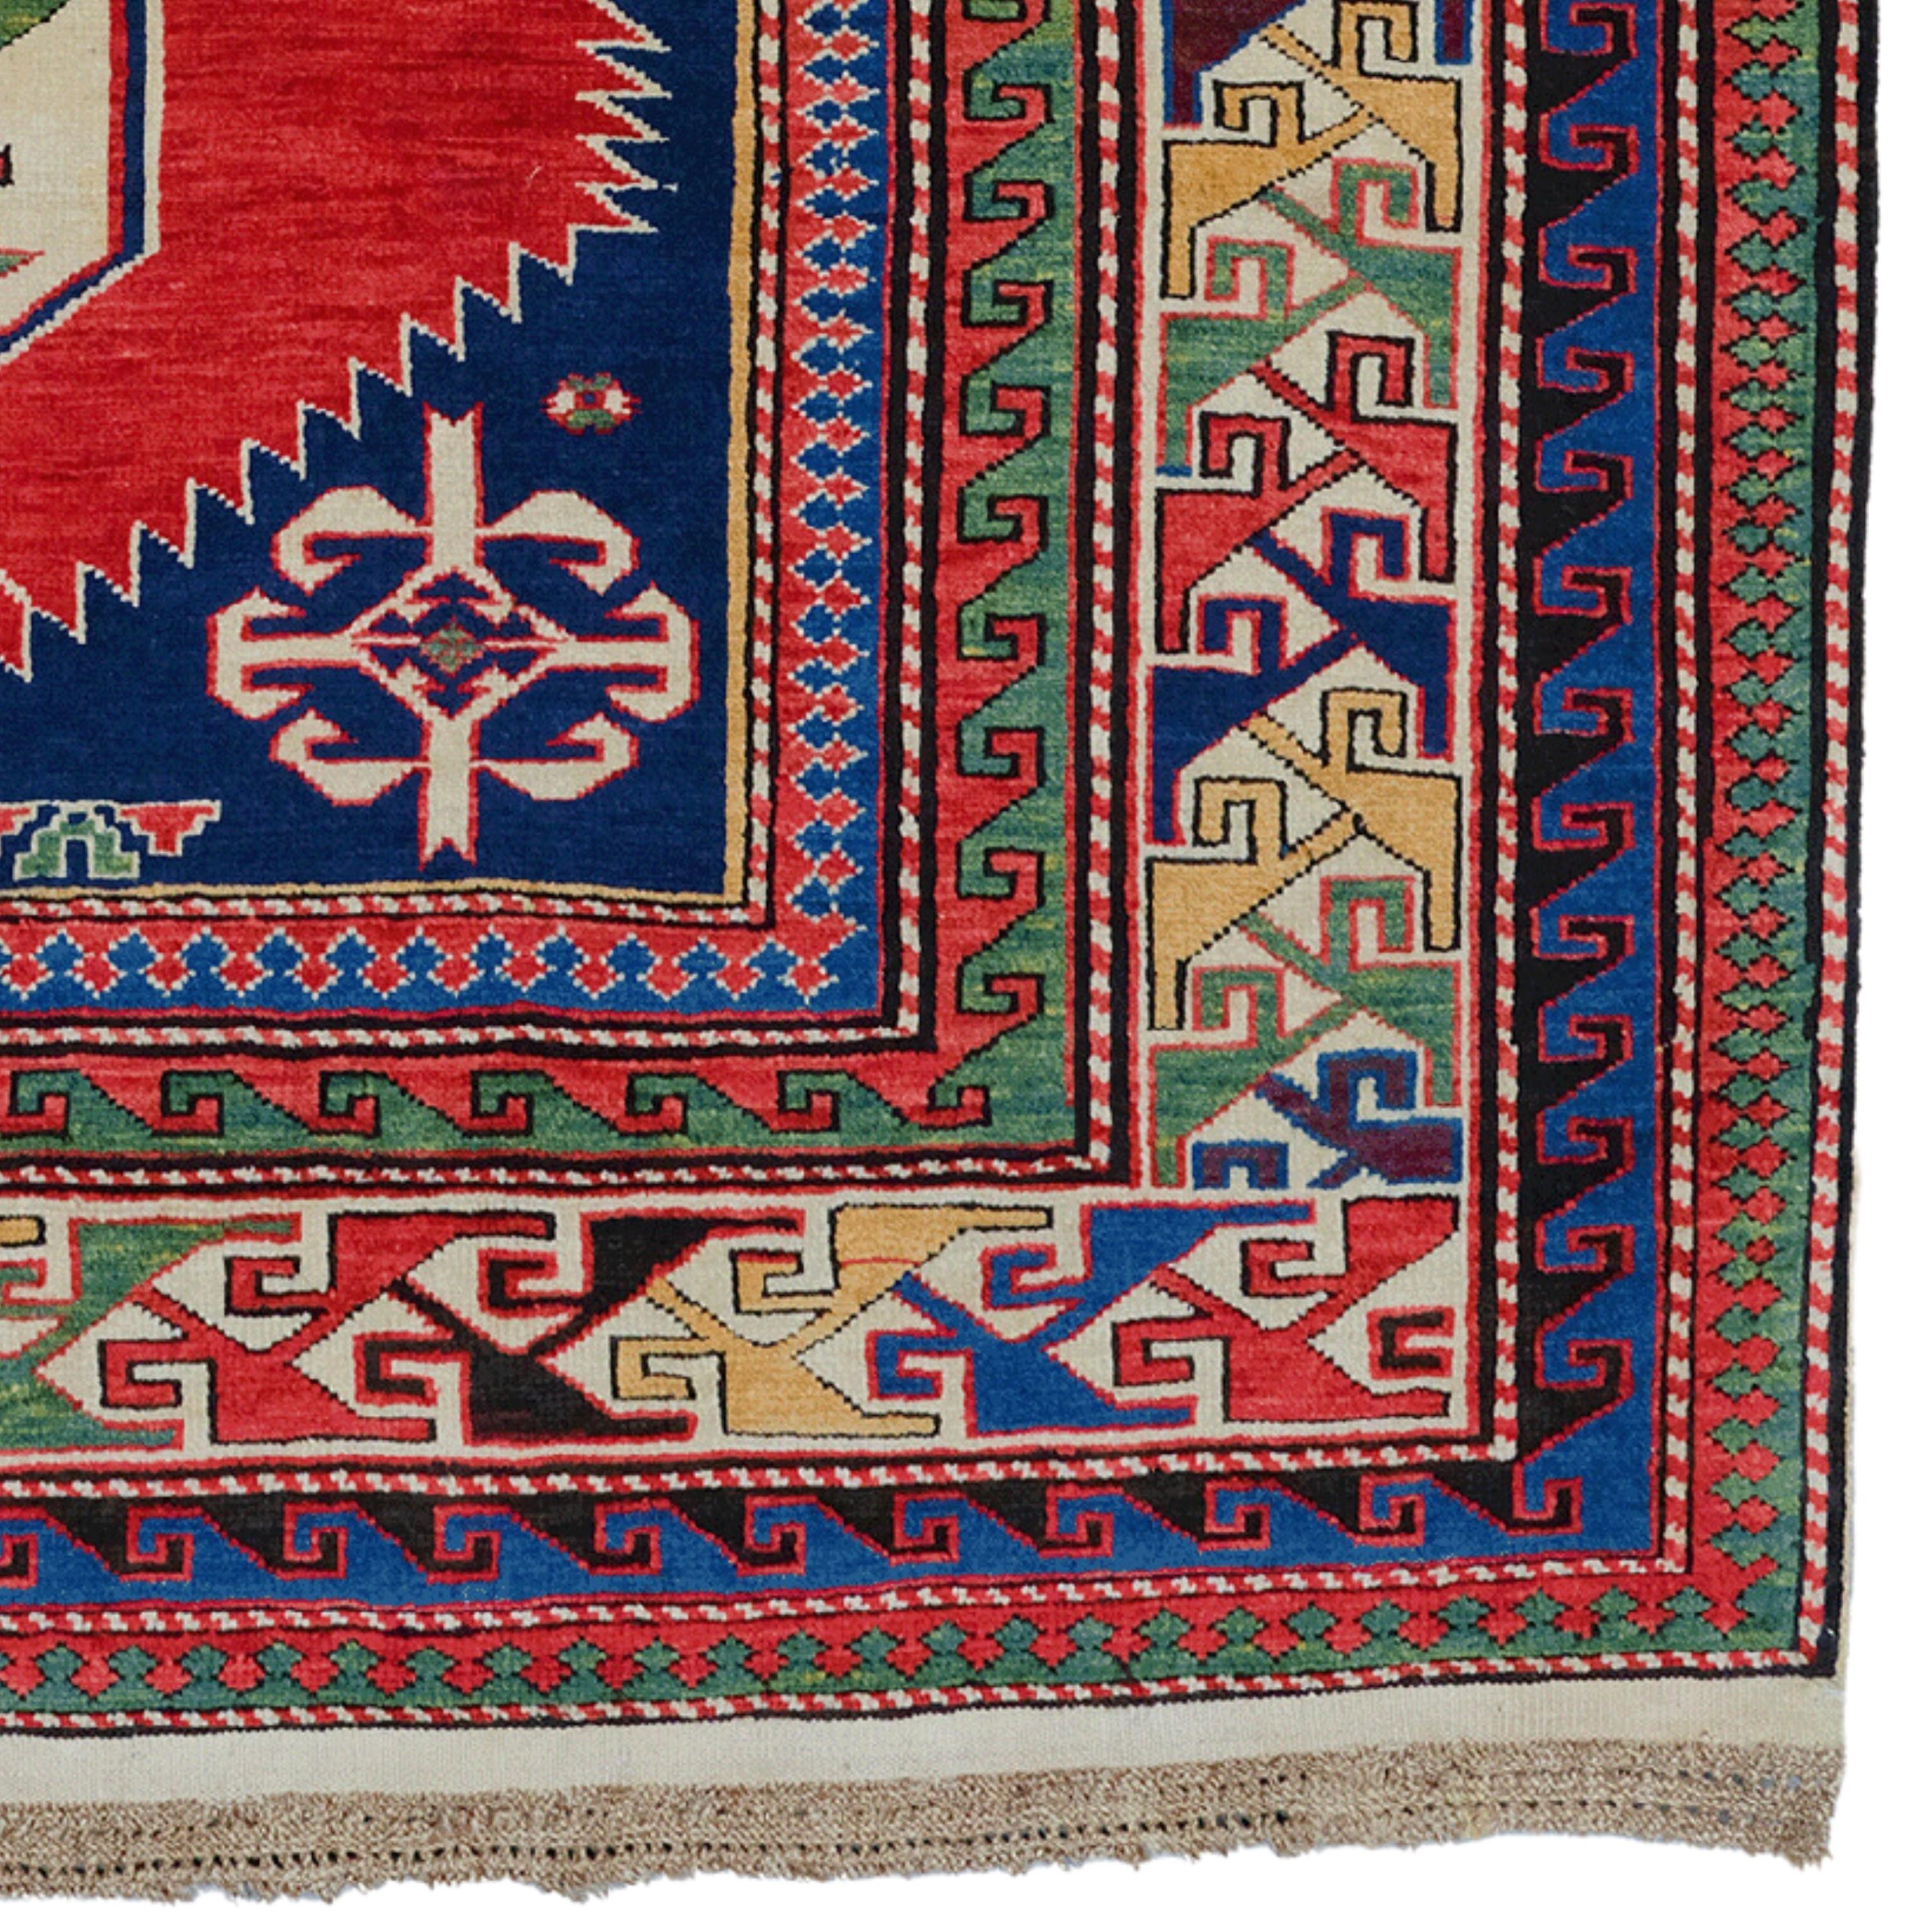 Middle of 19th Century Shirvan Karagashli Rug

This exquisite antique Caucasian Shirvan rug is a work of art from the mid-19th century. Standing out with its rich color palette and intricate patterns, this piece is perfect for adding an authentic